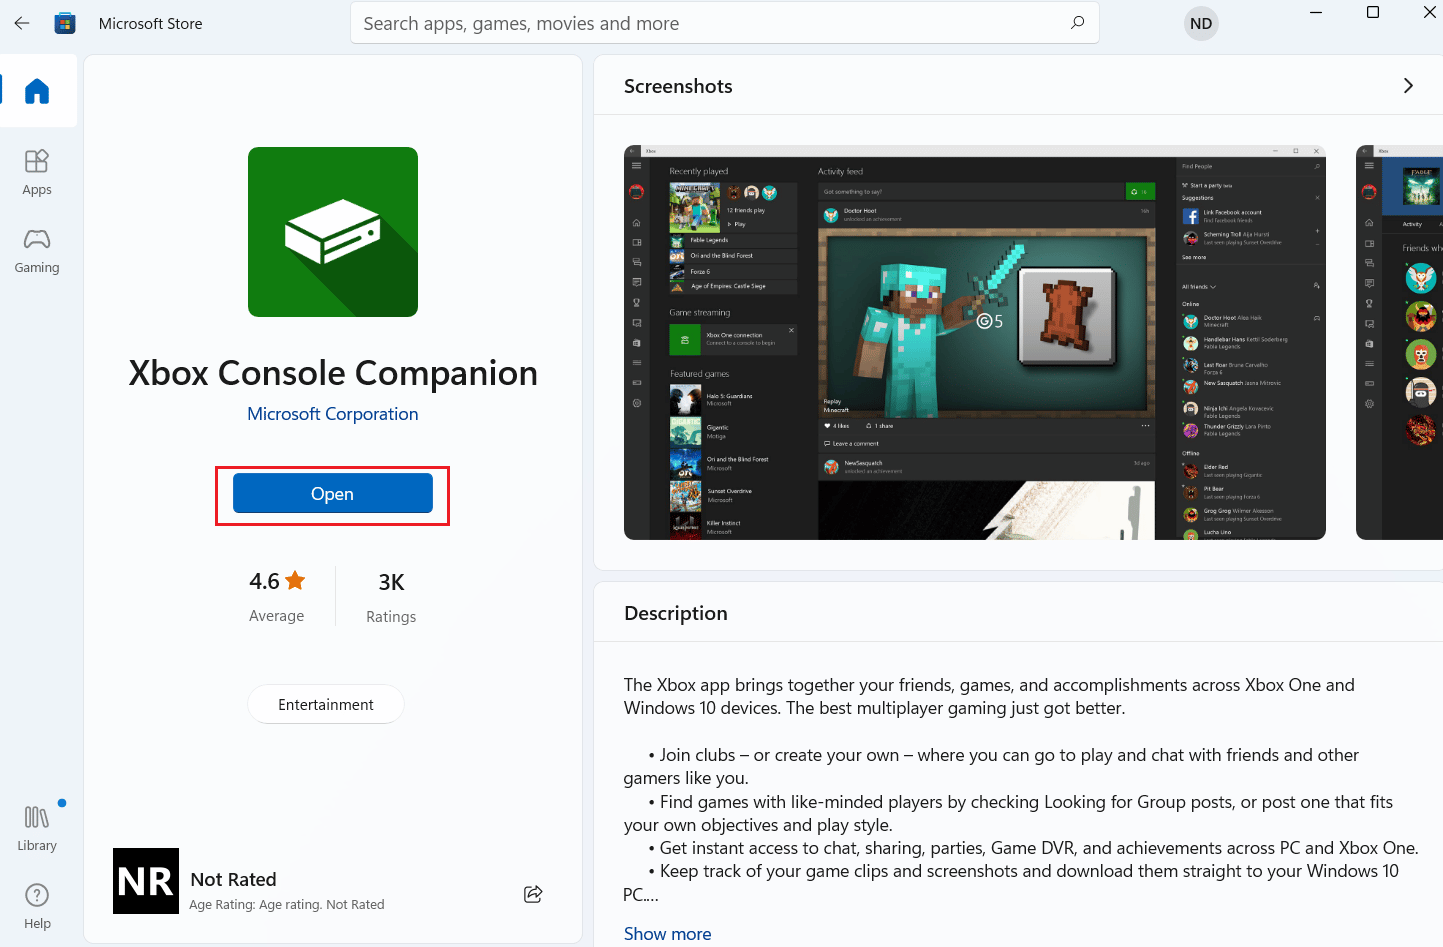 Microsoft Store - search for the Xbox Console Companion - Open | How to Change Your Profile Picture on Xbox App | cannot customize Xbox Gamerpic